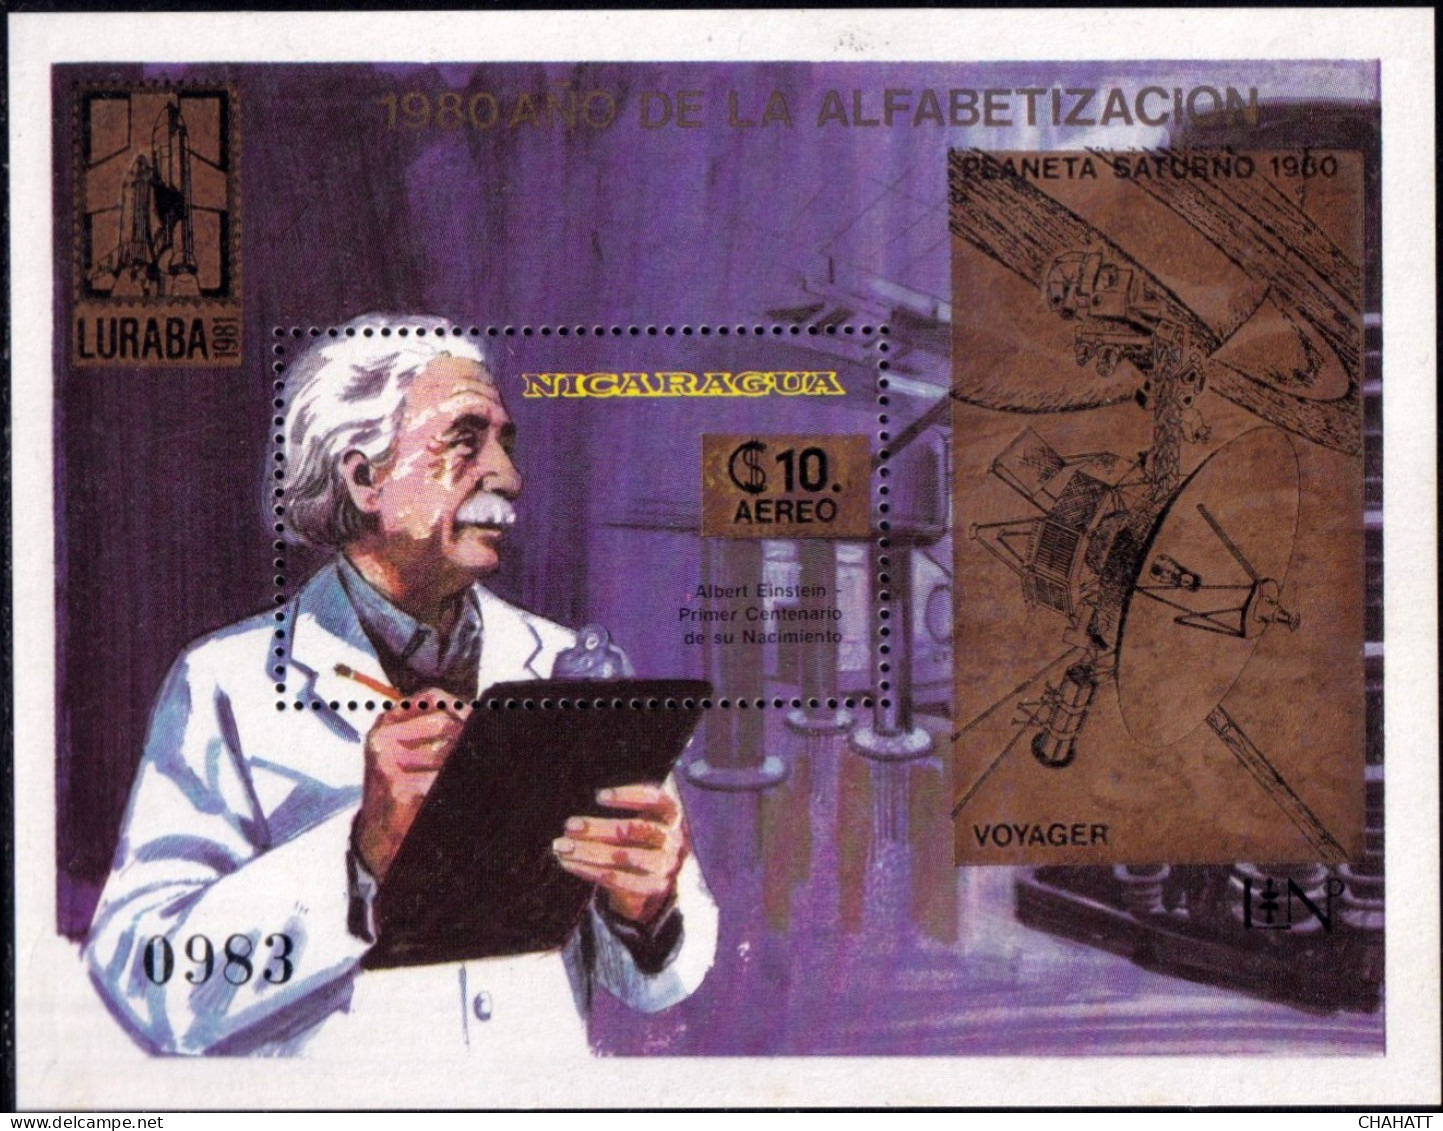 VOYAGER TOWARDS SATURN - NICARAGUA- 1980-GOLD OVERLAY WITH OVPT- EINSTEIN MS -MNH-M3-128 - América Del Norte